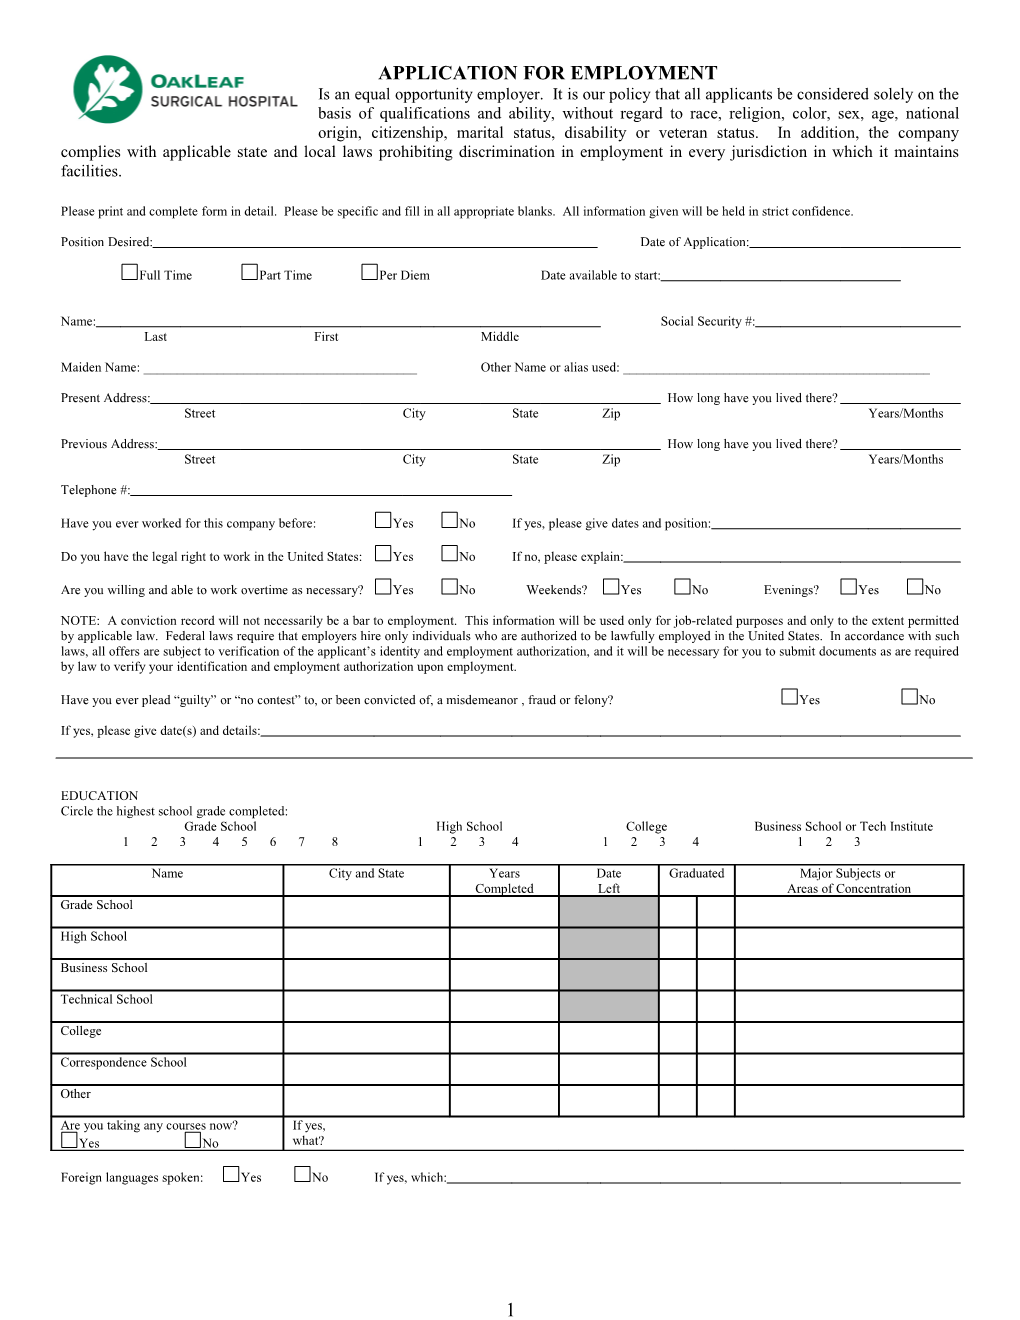 Application for Employment s16